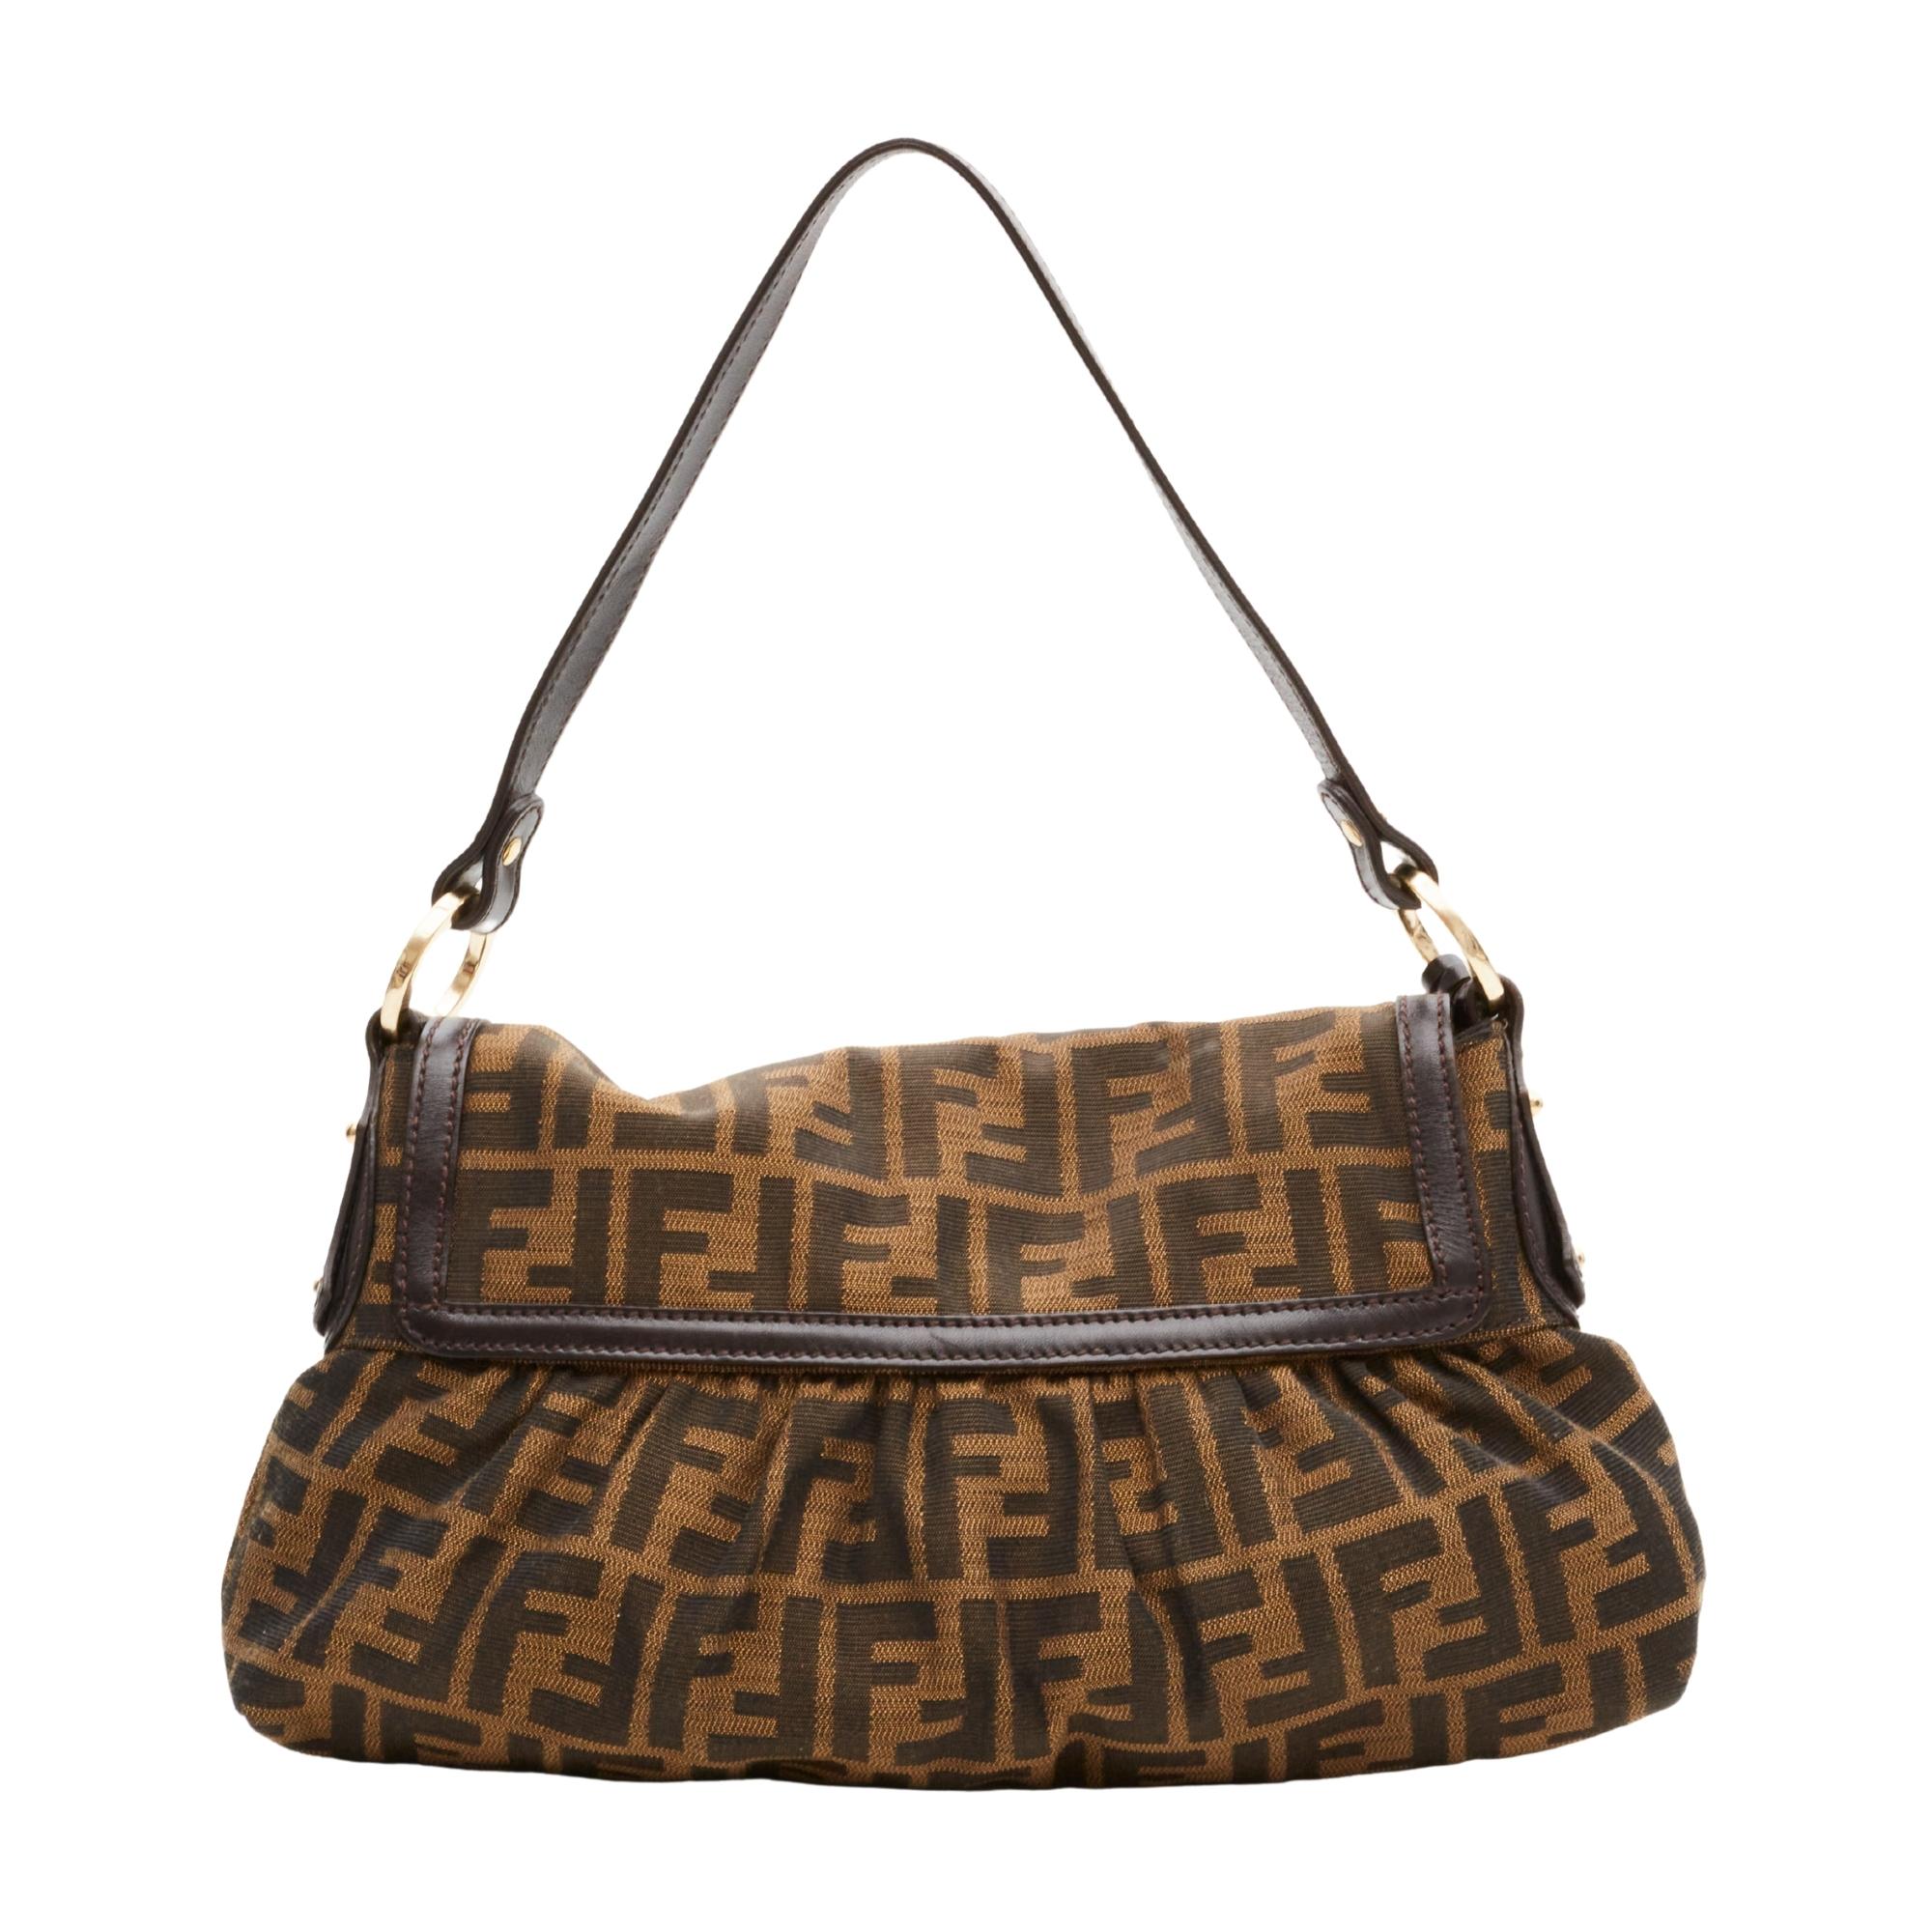 This bag is made with classic Fendi monogram Zucca print on brown canvas with brown leather finishes. The bag features a flat leather shoulder strap attached by gold tone hardware circular links, a hanging logo charm at front, a front flap, and